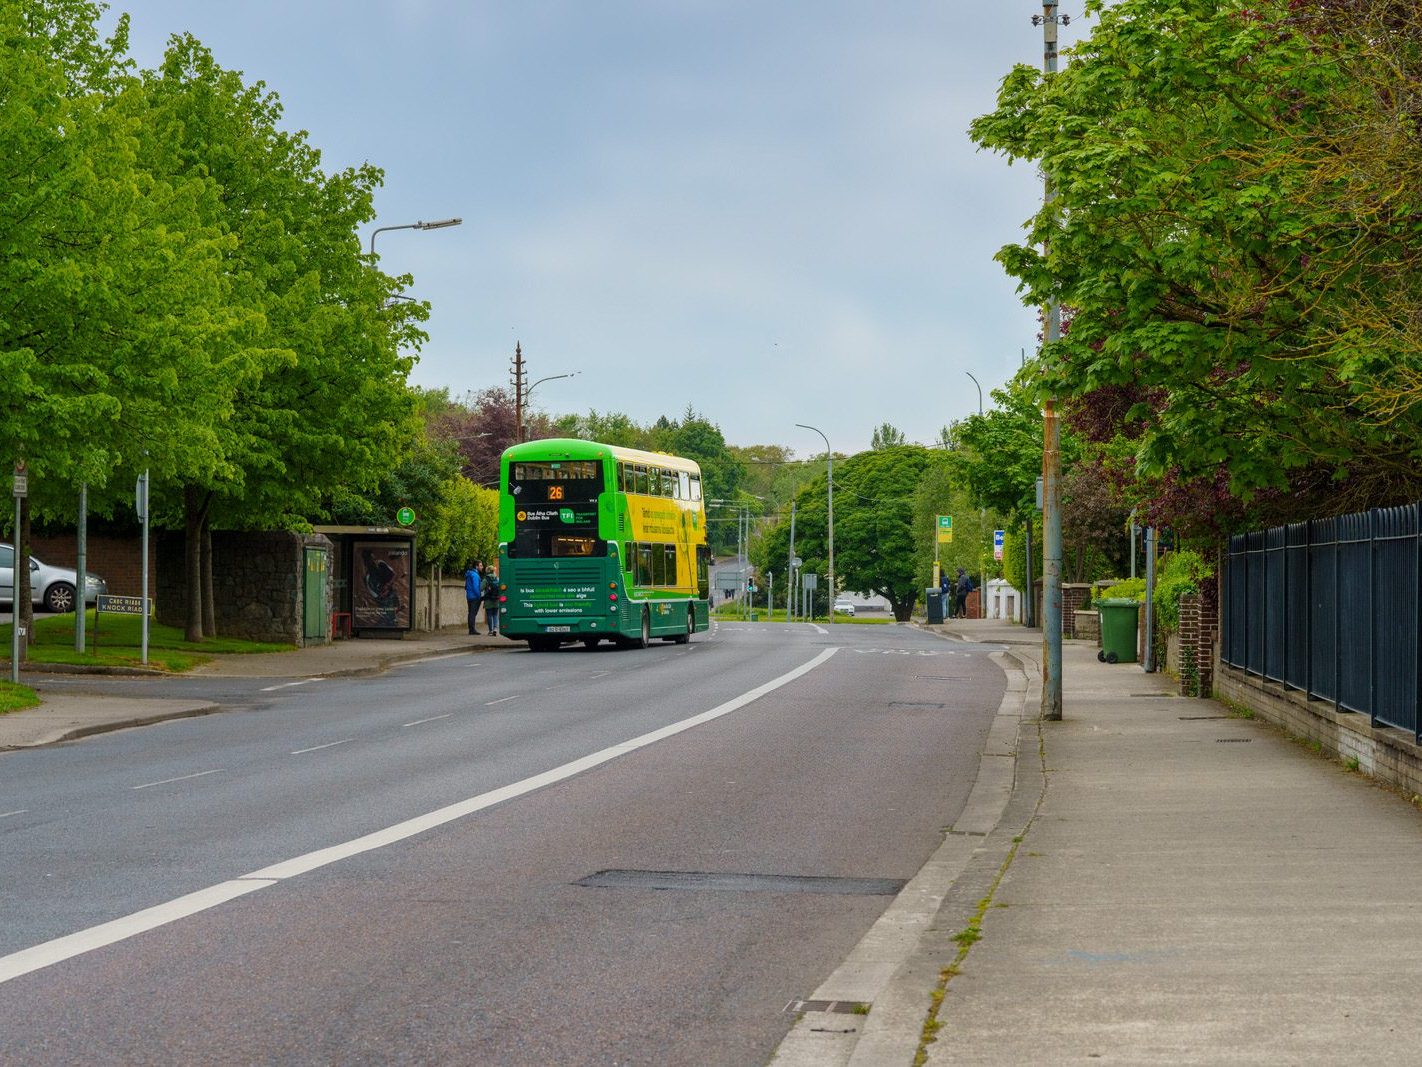 TODAY I GOT THE 26 BUS AND EXPLORED LUCAN ROAD [CHAPELIZOD ON THE SOUTH BANK OF THE RIVER LIFFEY-232483-1